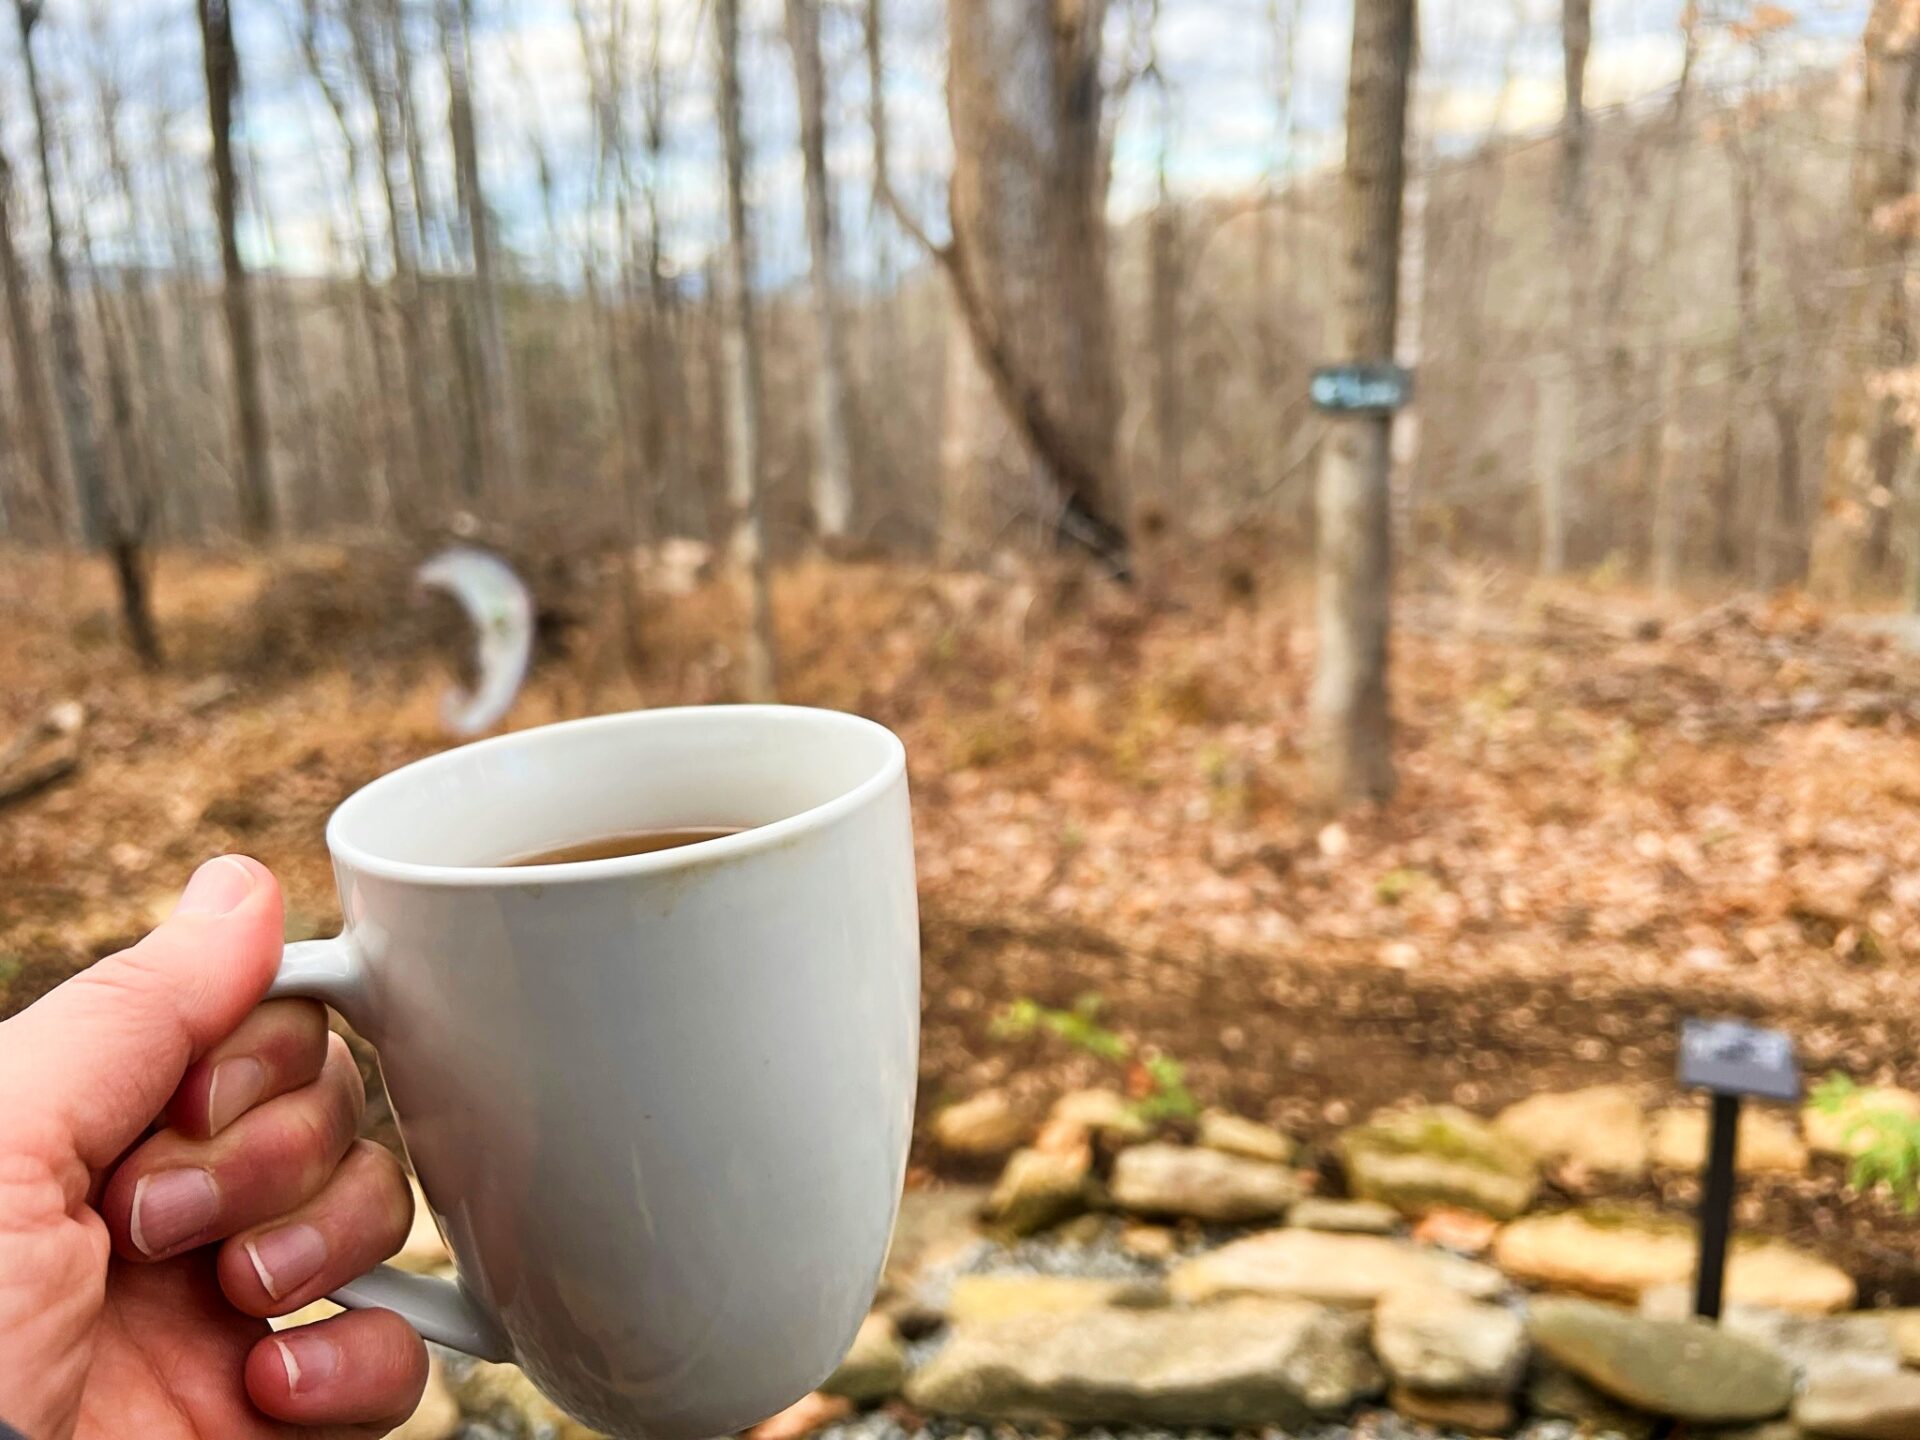 How to (and why) Go on a Solo “Mini”Retreat